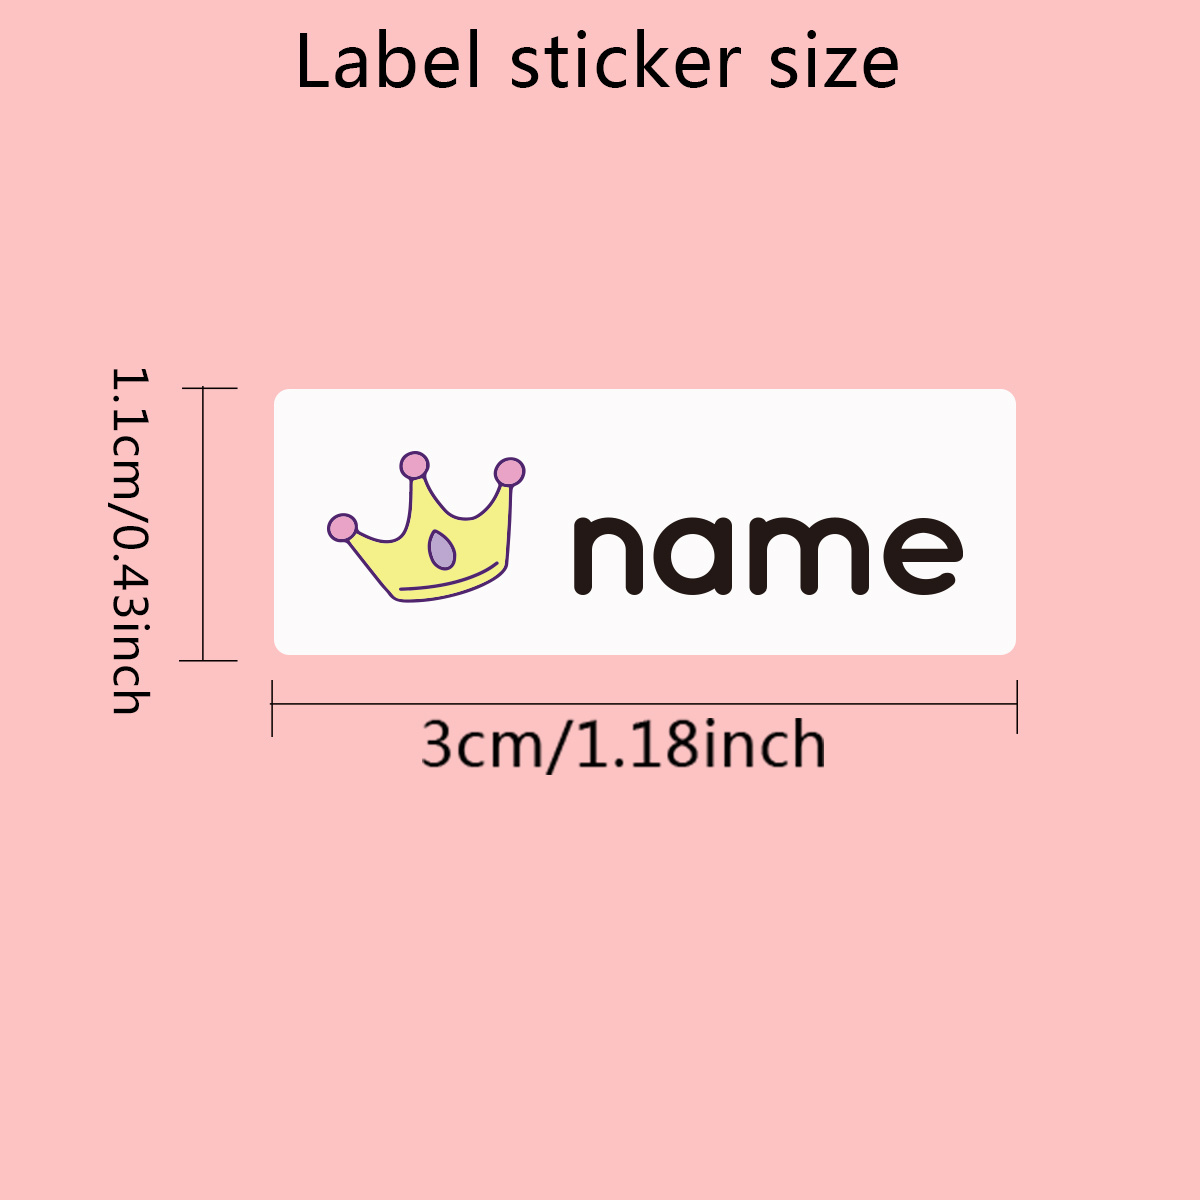 Personalized Name Labels & Stickers For Kids